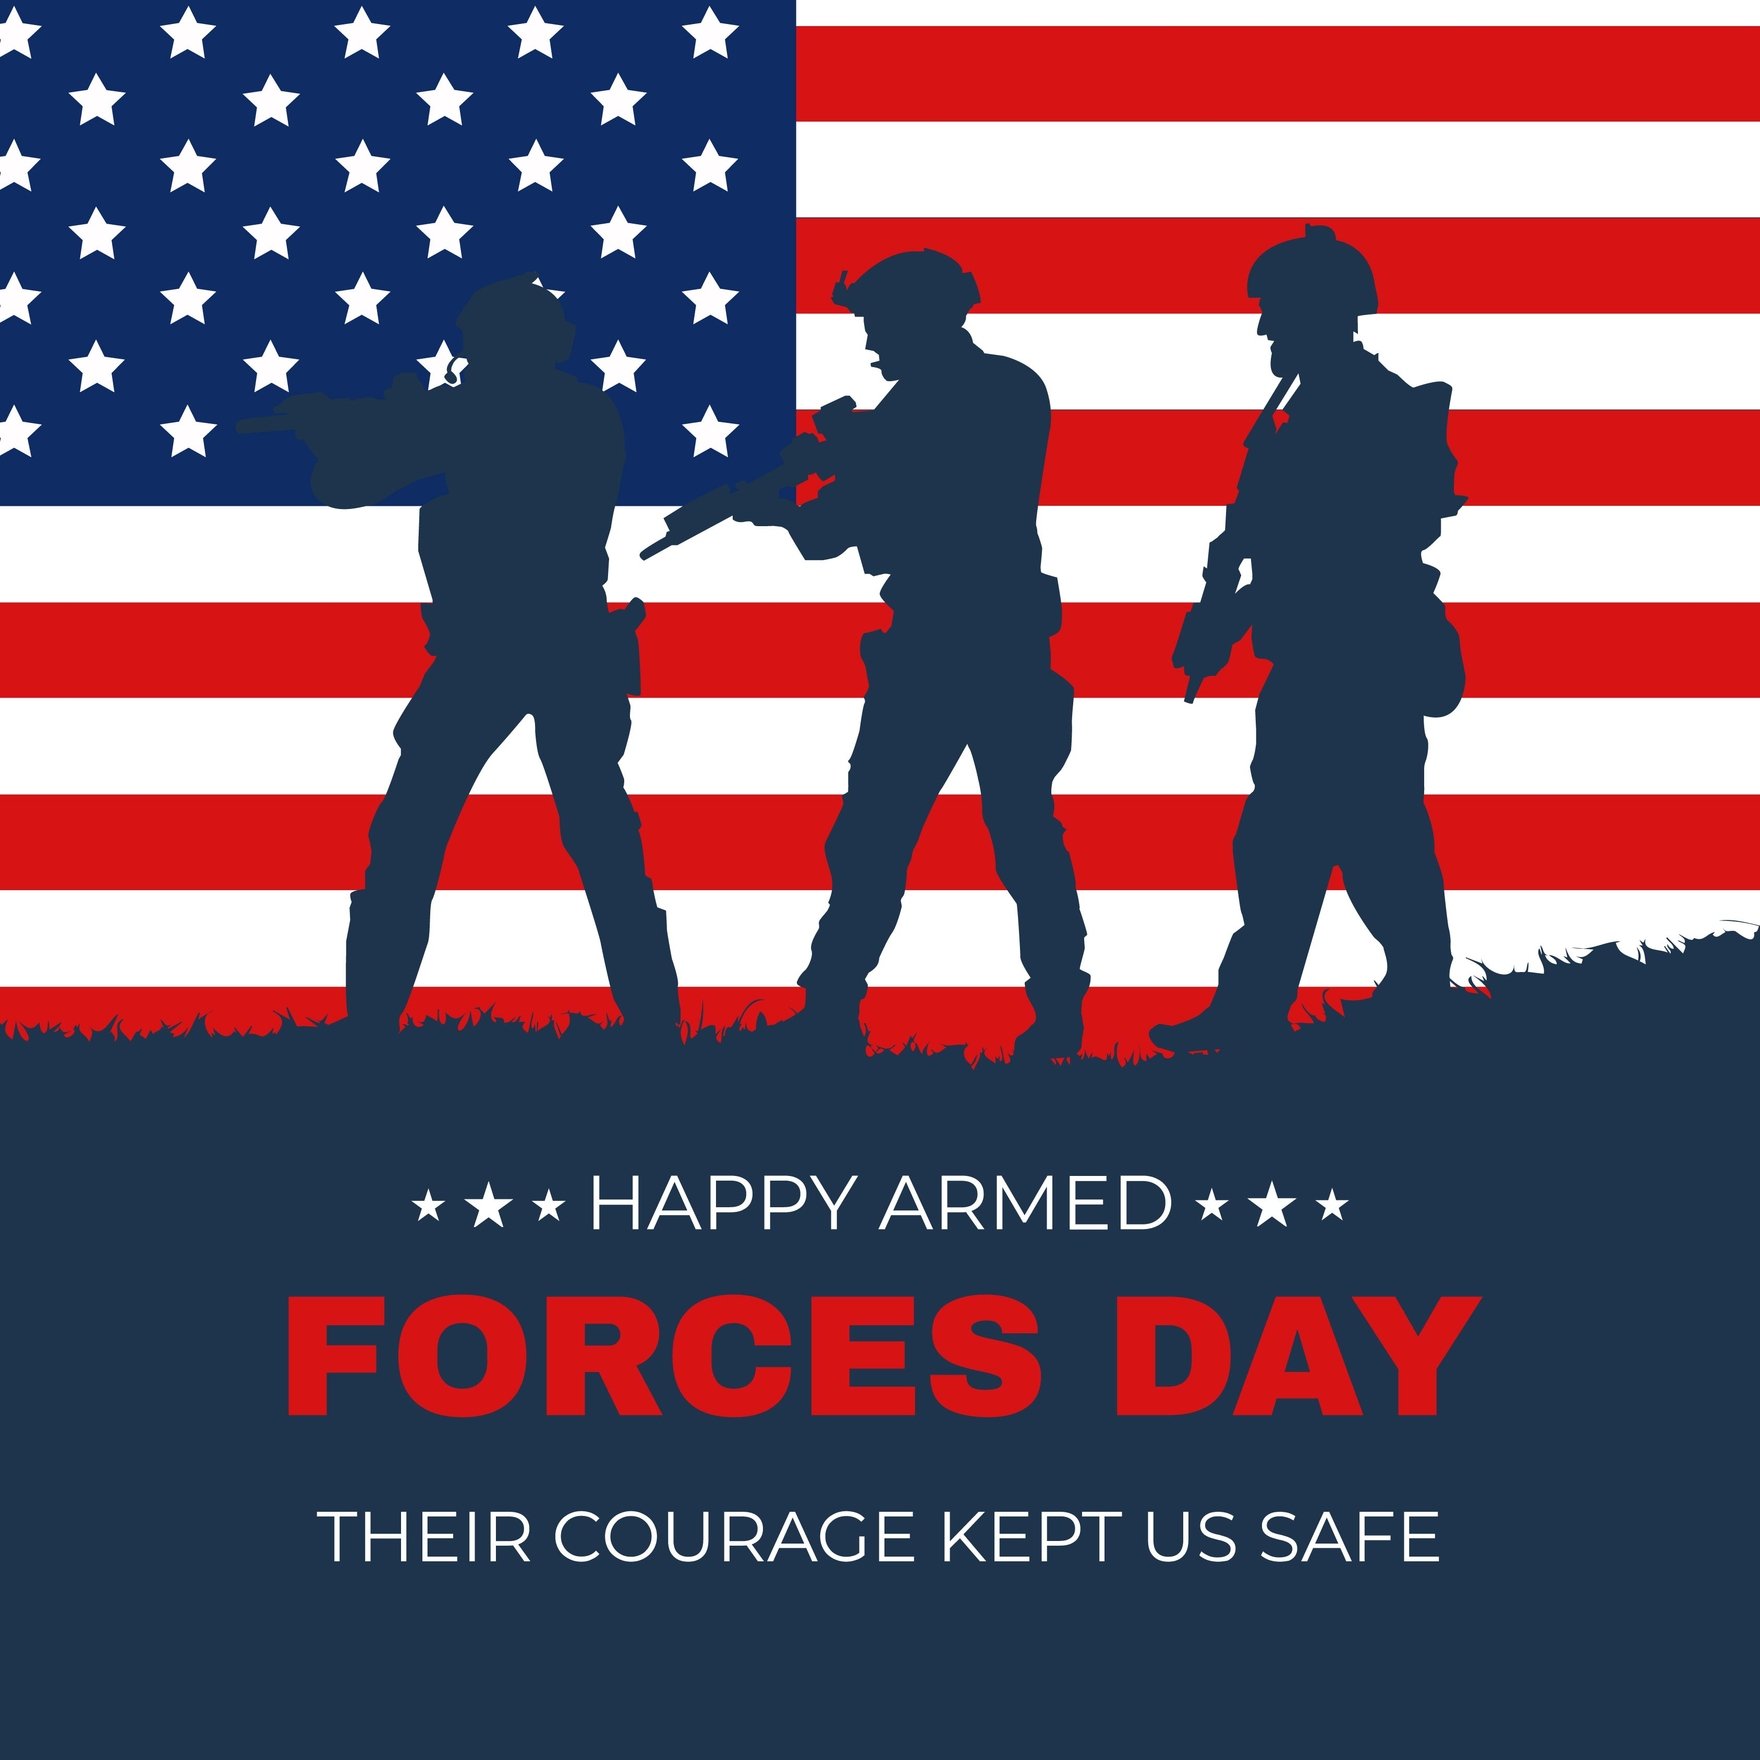 Free Armed Forces Day Instagram Post